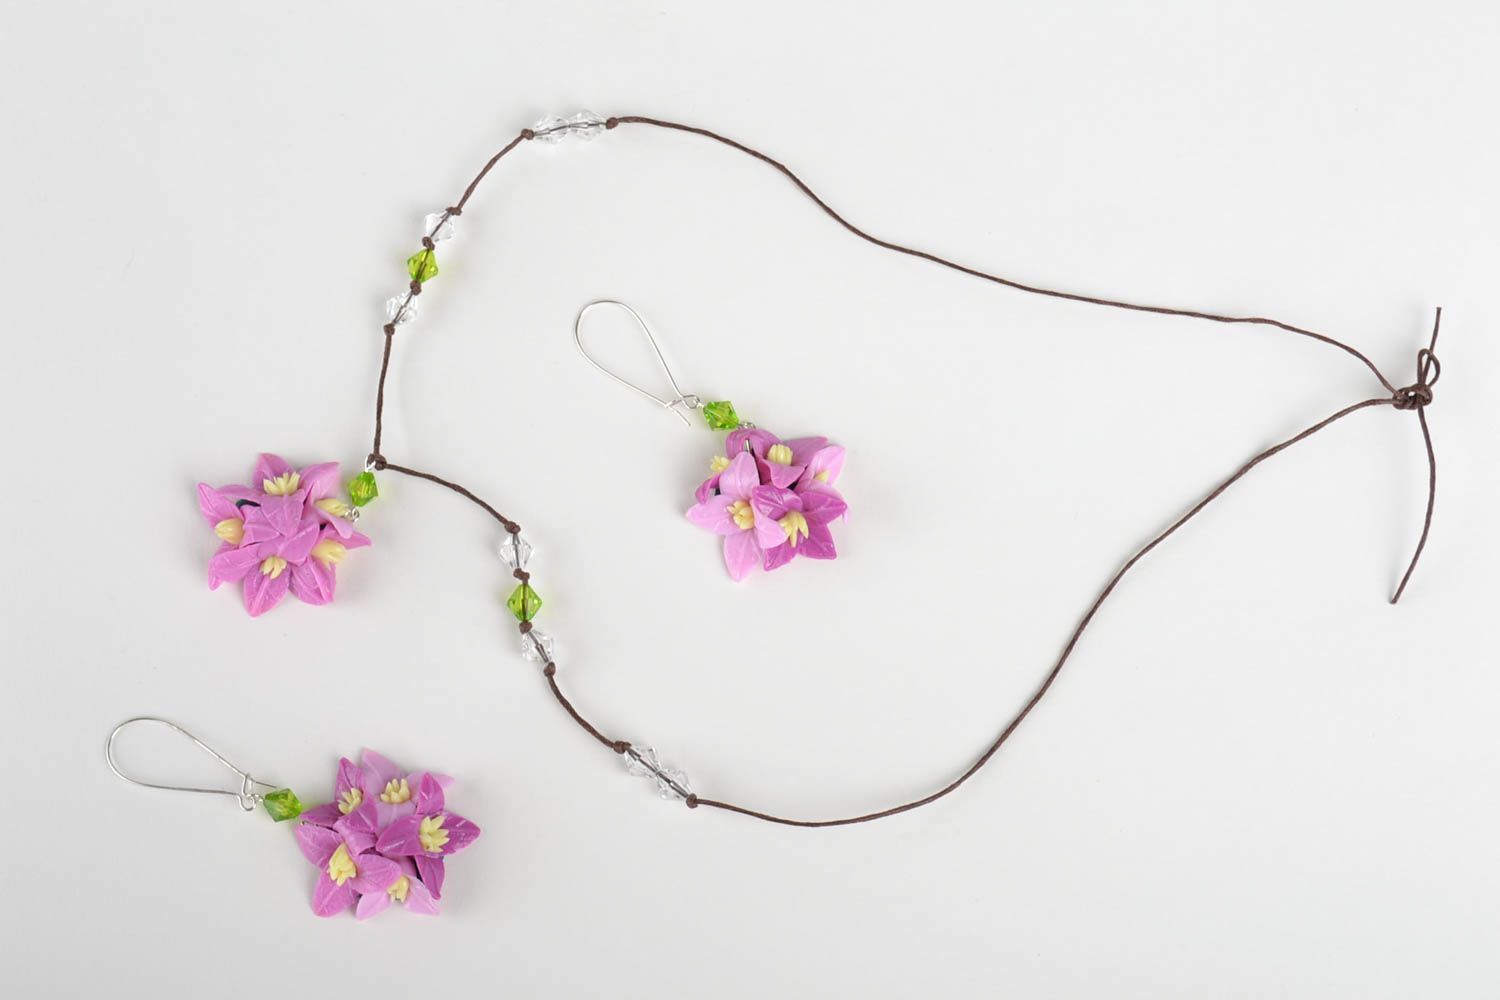 Handmade flower jewelry set dangling earrings pendant necklace polymer clay photo 2